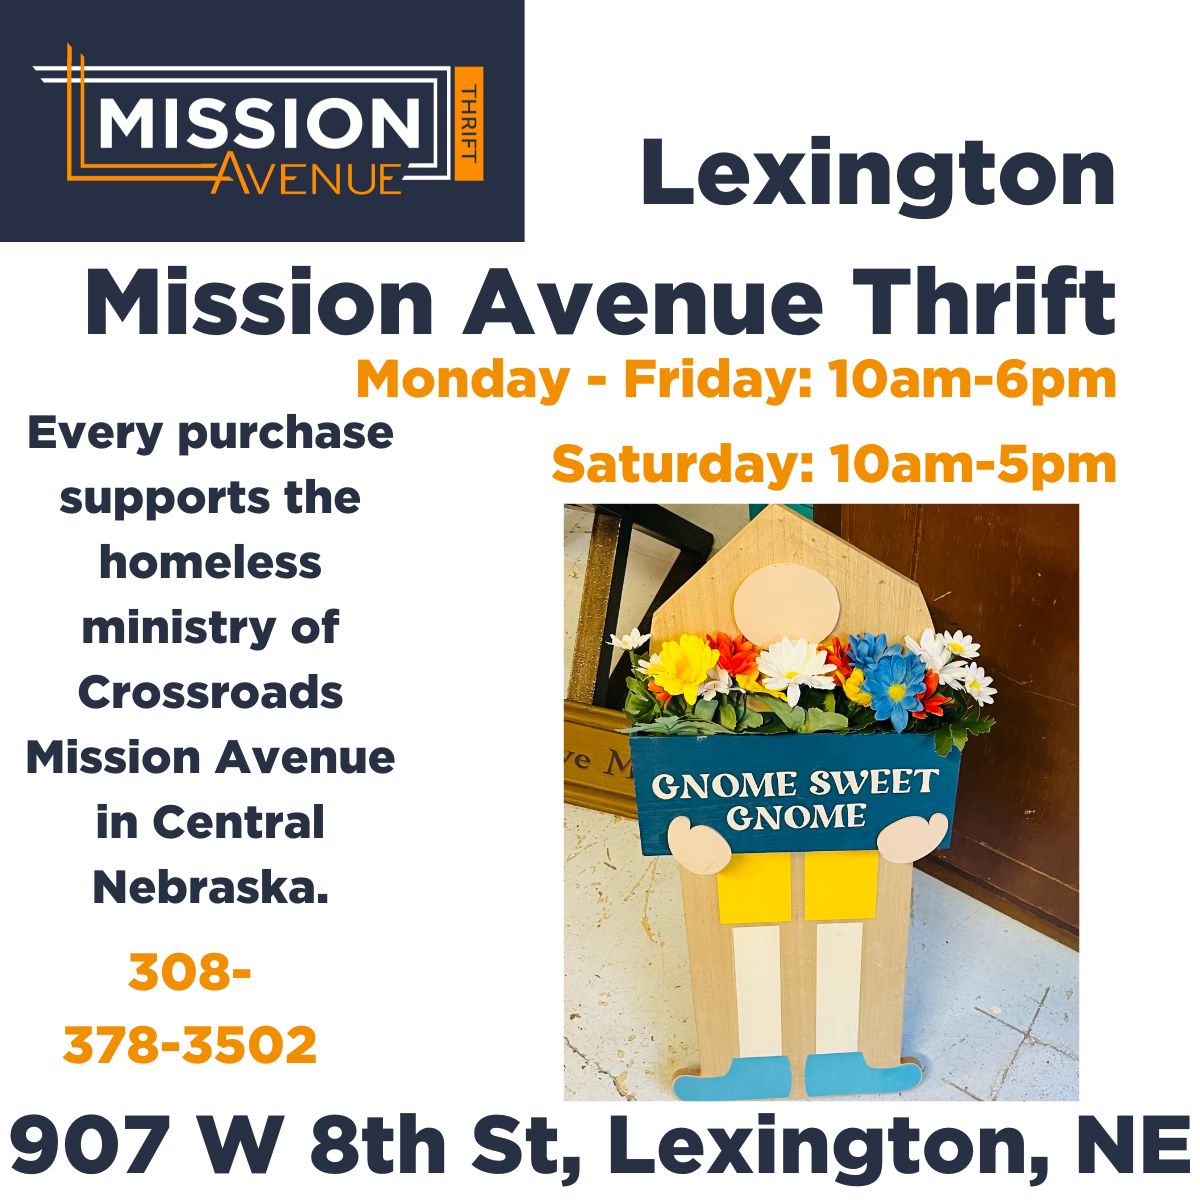 Come in TODAY and see what's NEW at Lexington Mission Avenue Thrift! crossroadsmission.com/thrift-stores/ #MissionAvenueThrift #LexingtonNebraska #Thriftstore #Shoptoday